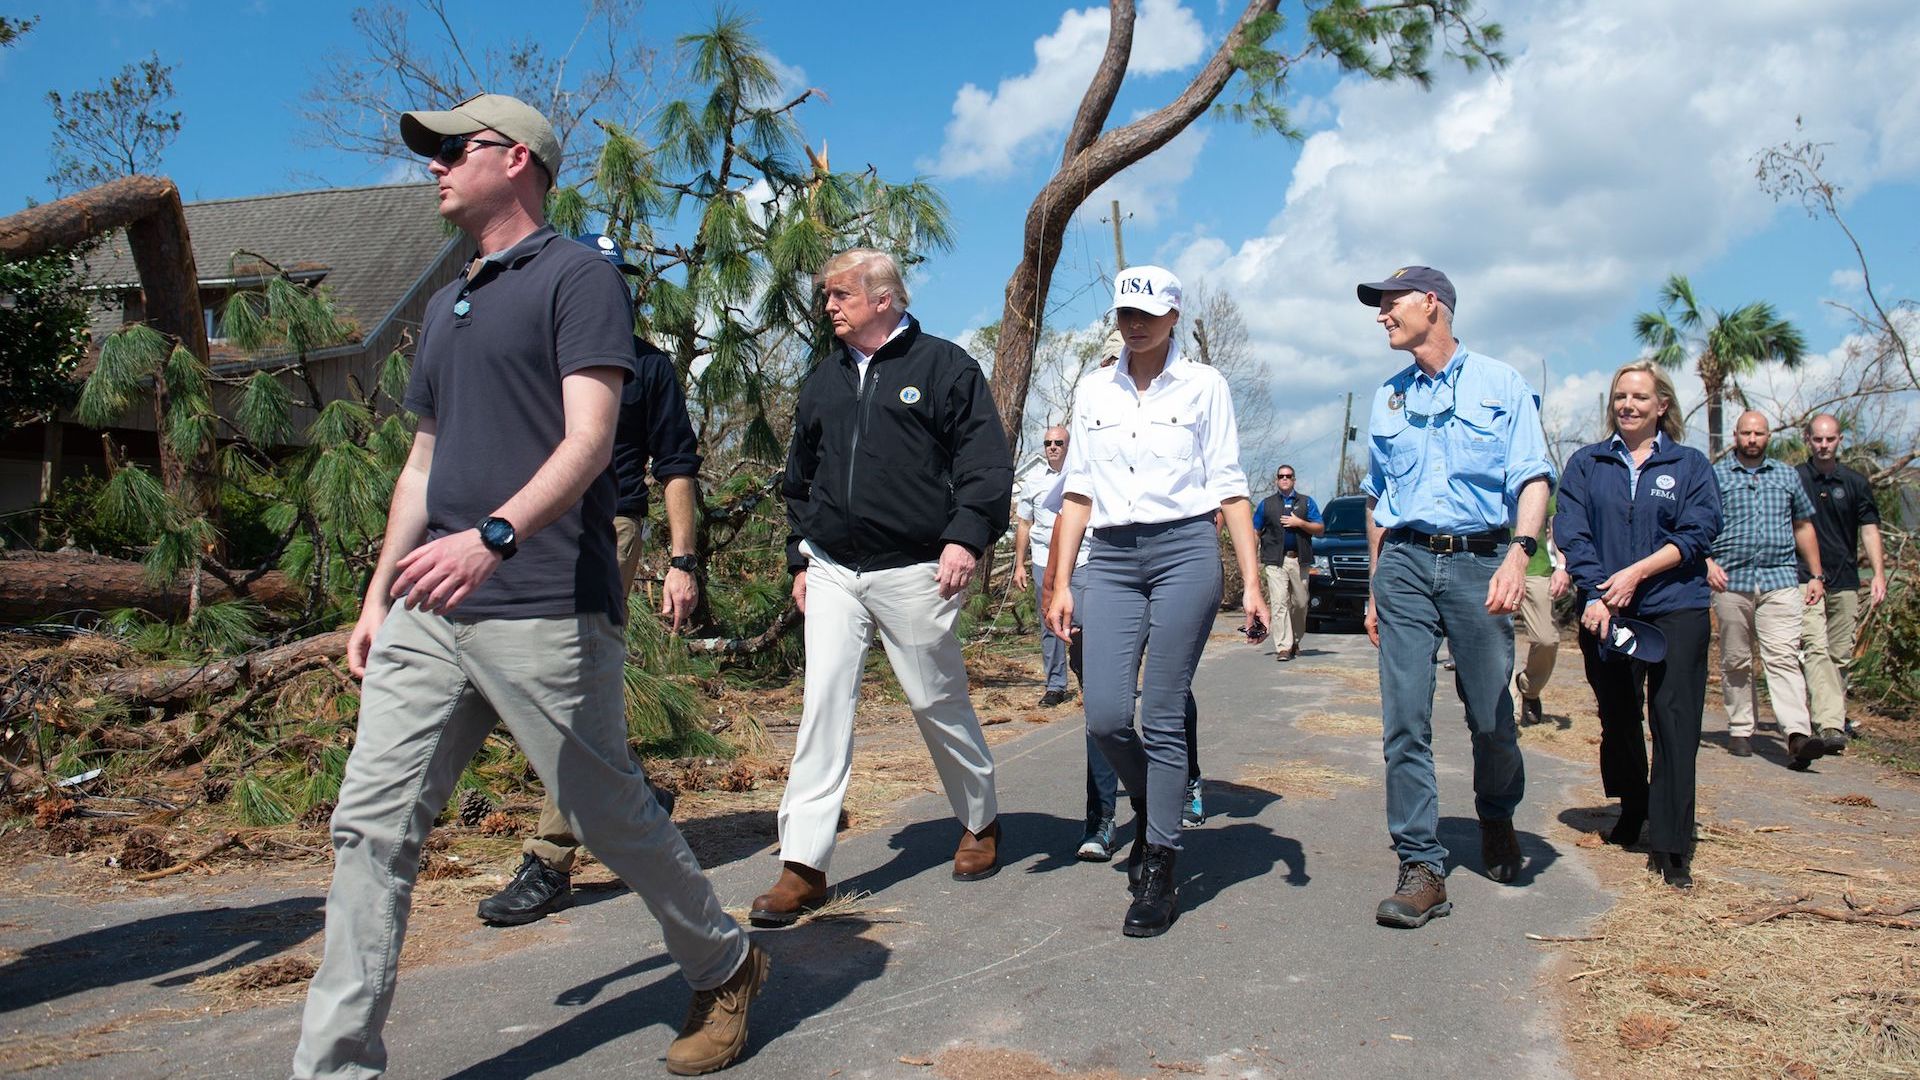 President Trump toured damage caused by Hurricane Michael on Oct. 15, 2018. Trump denied the storm was connected to climate change.